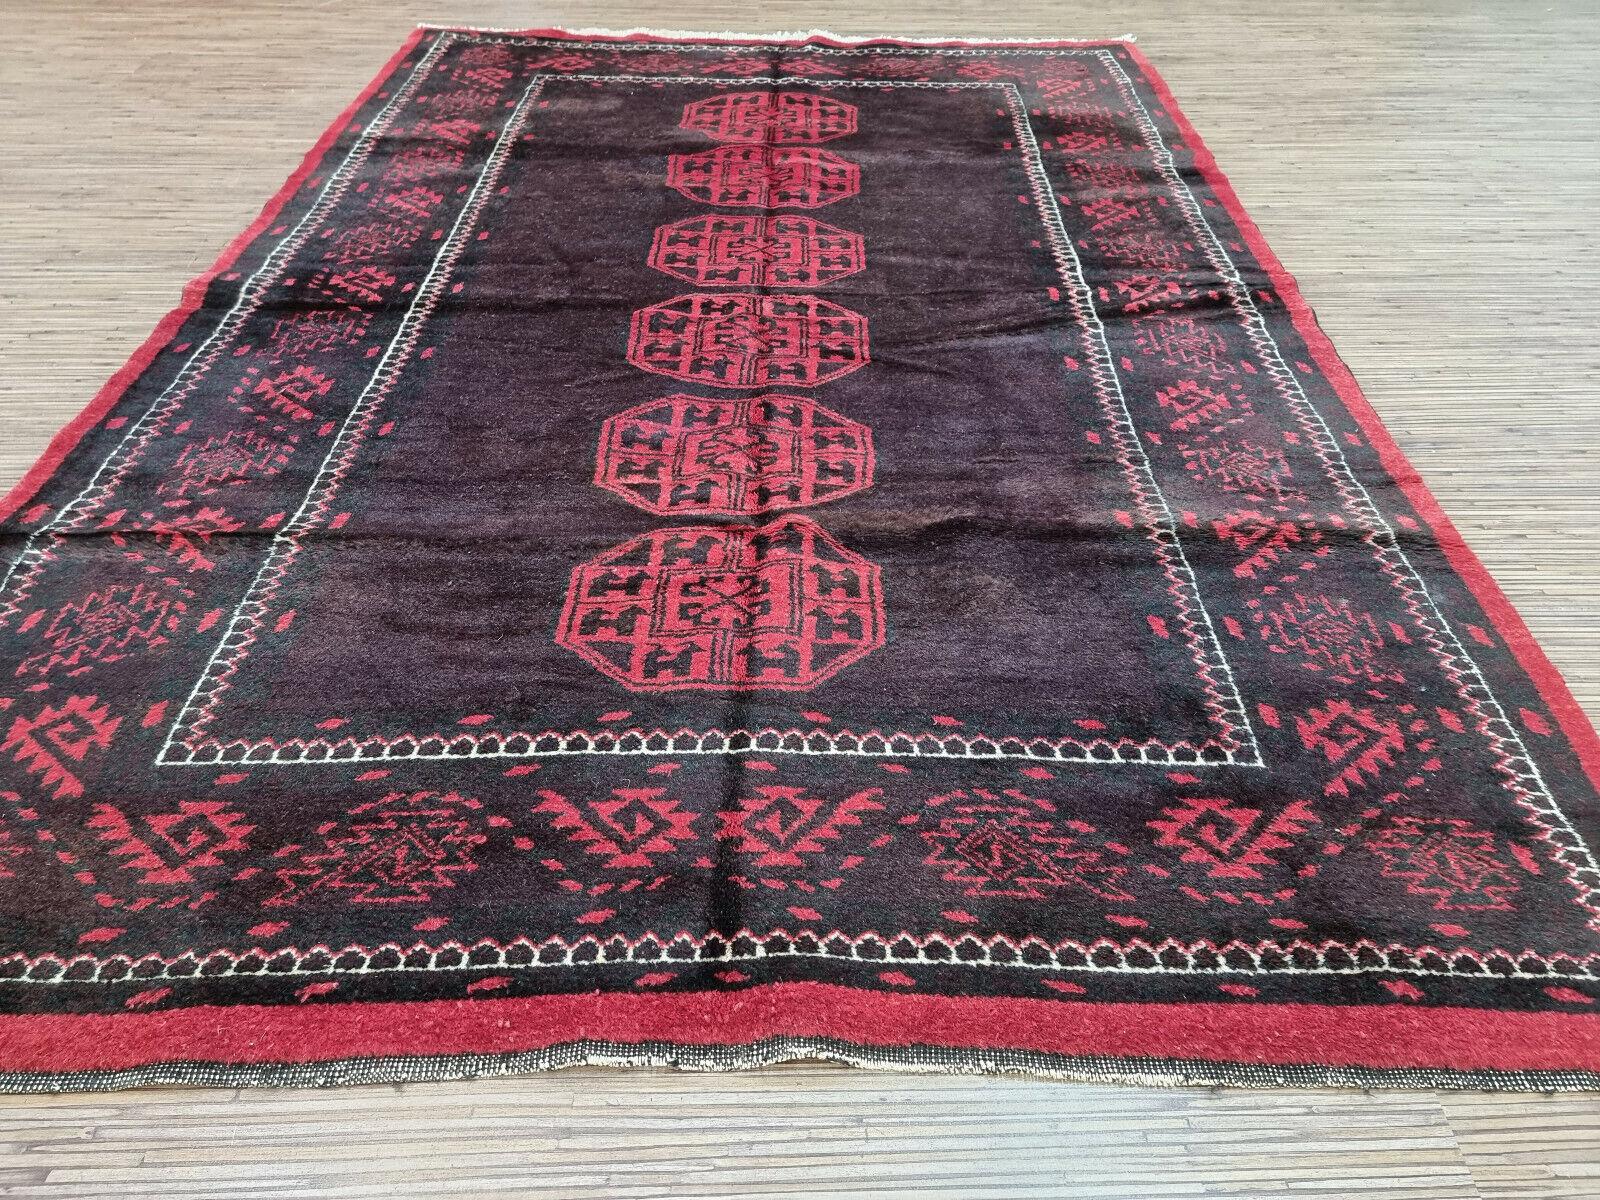 Hand-Knotted Handmade Vintage Afghan Baluch Rug 4' x 6.1', 1950s - 1D92 For Sale